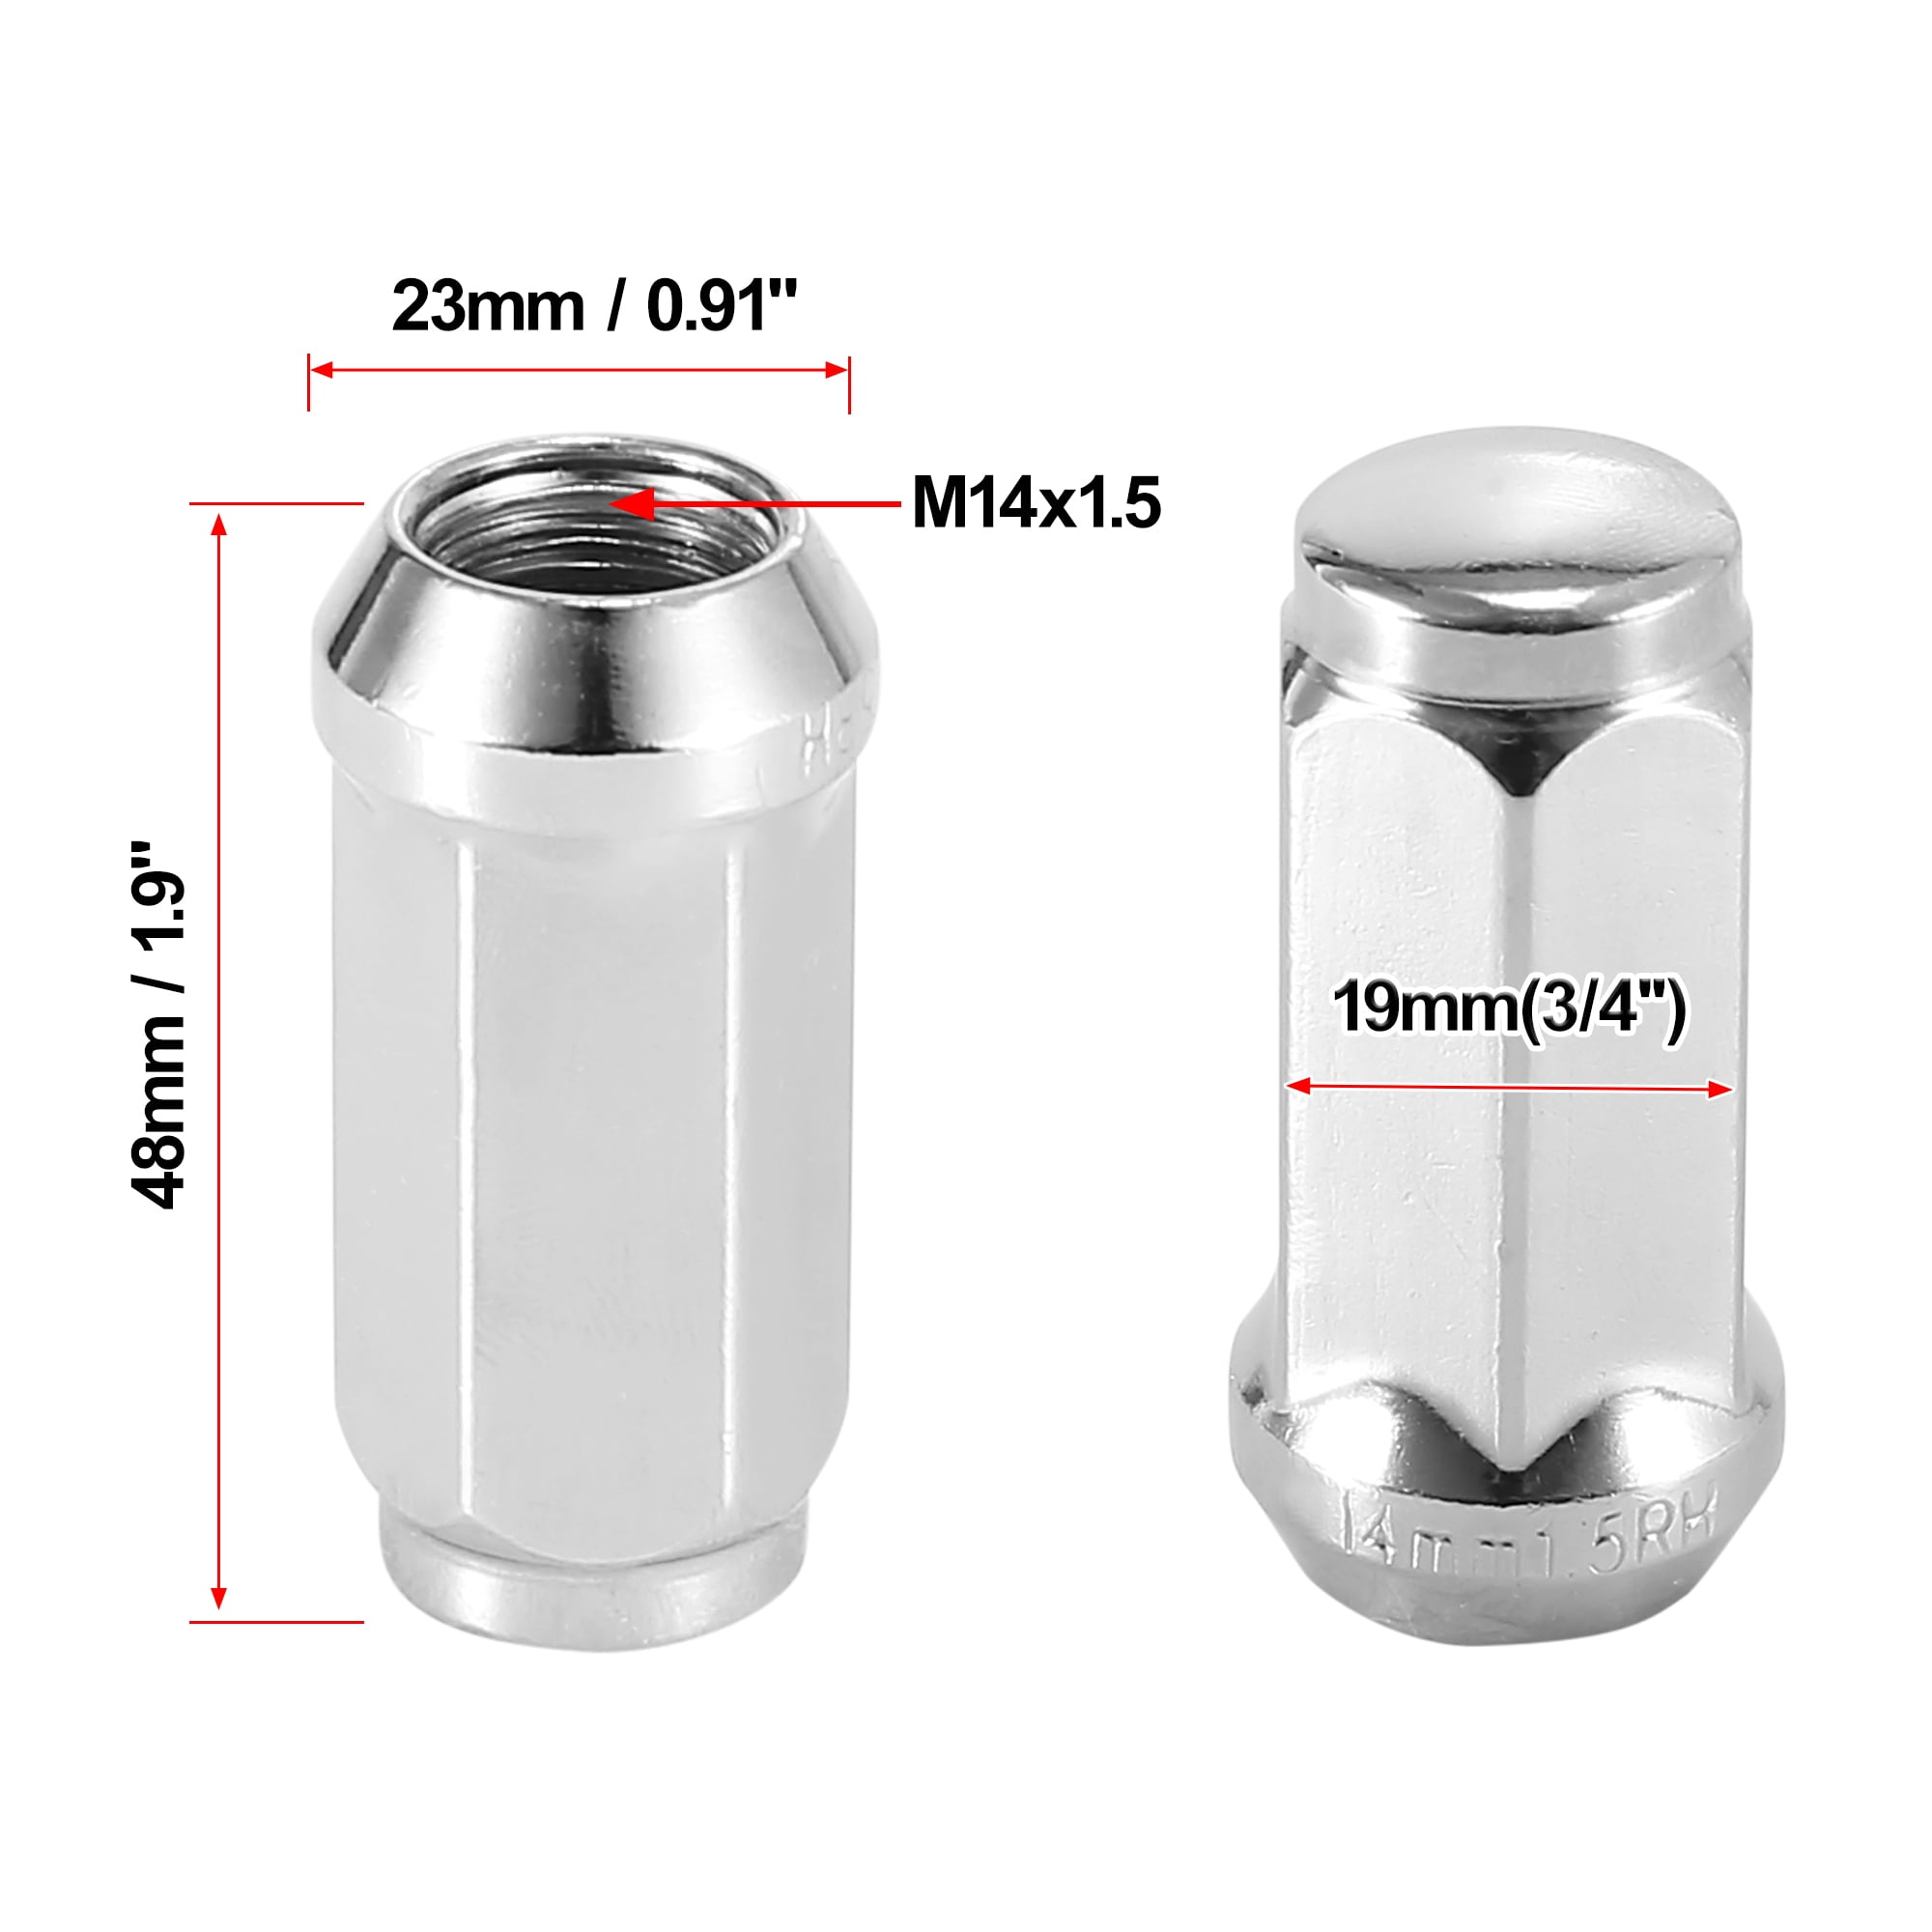 M14x1.5 Lug Nuts with Cone Seat， 3/4